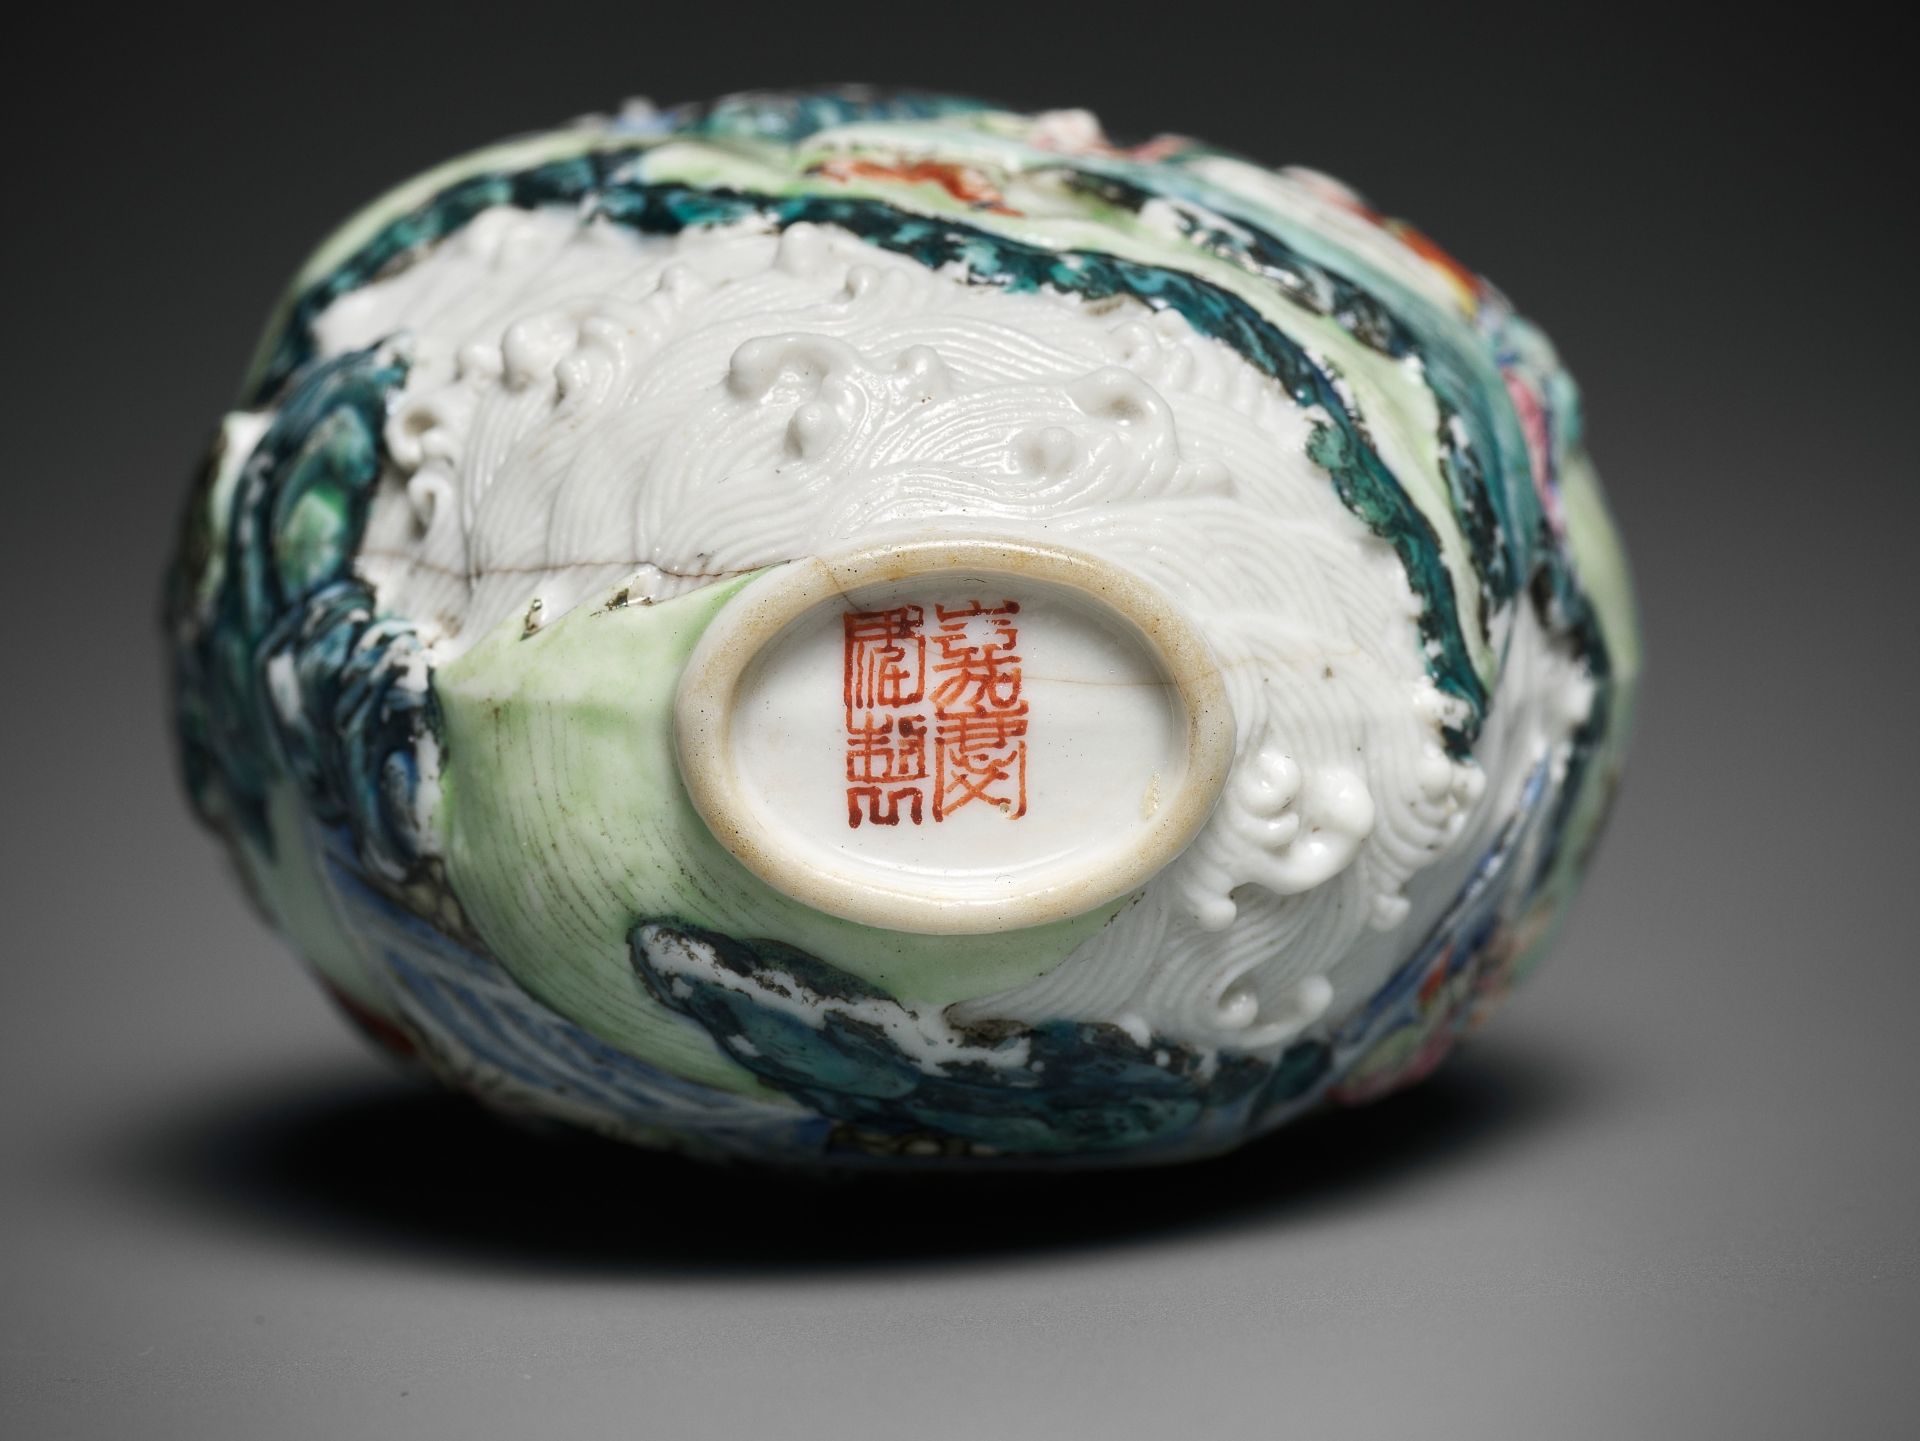 AN IMPERIAL MOLDED AND ENAMELED PORCELAIN SNUFF BOTTLE, JIAQING MARK AND PERIOD - Image 3 of 8